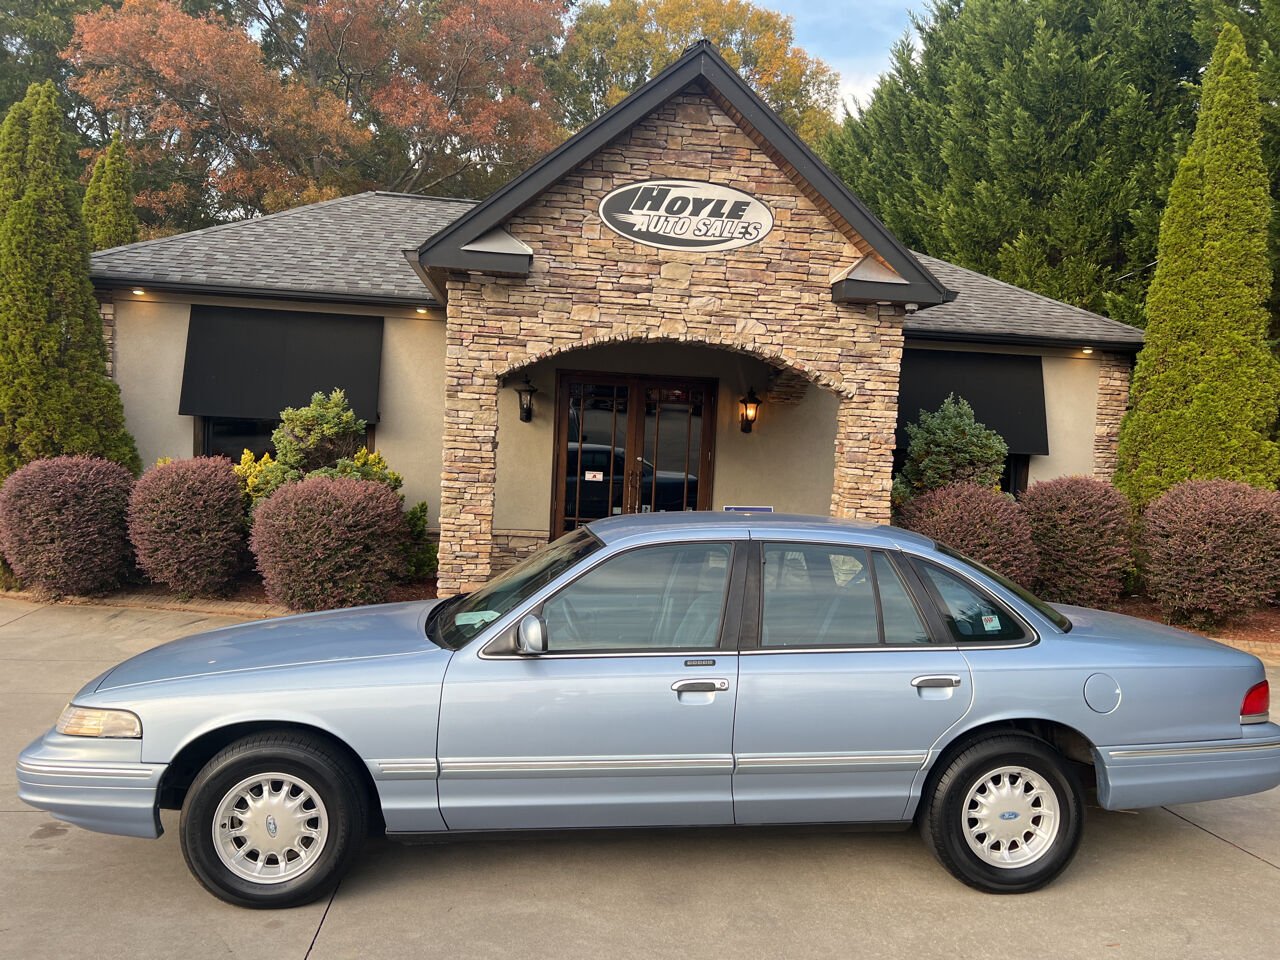 1997 Ford Crown Victoria For Sale - Carsforsale.com®